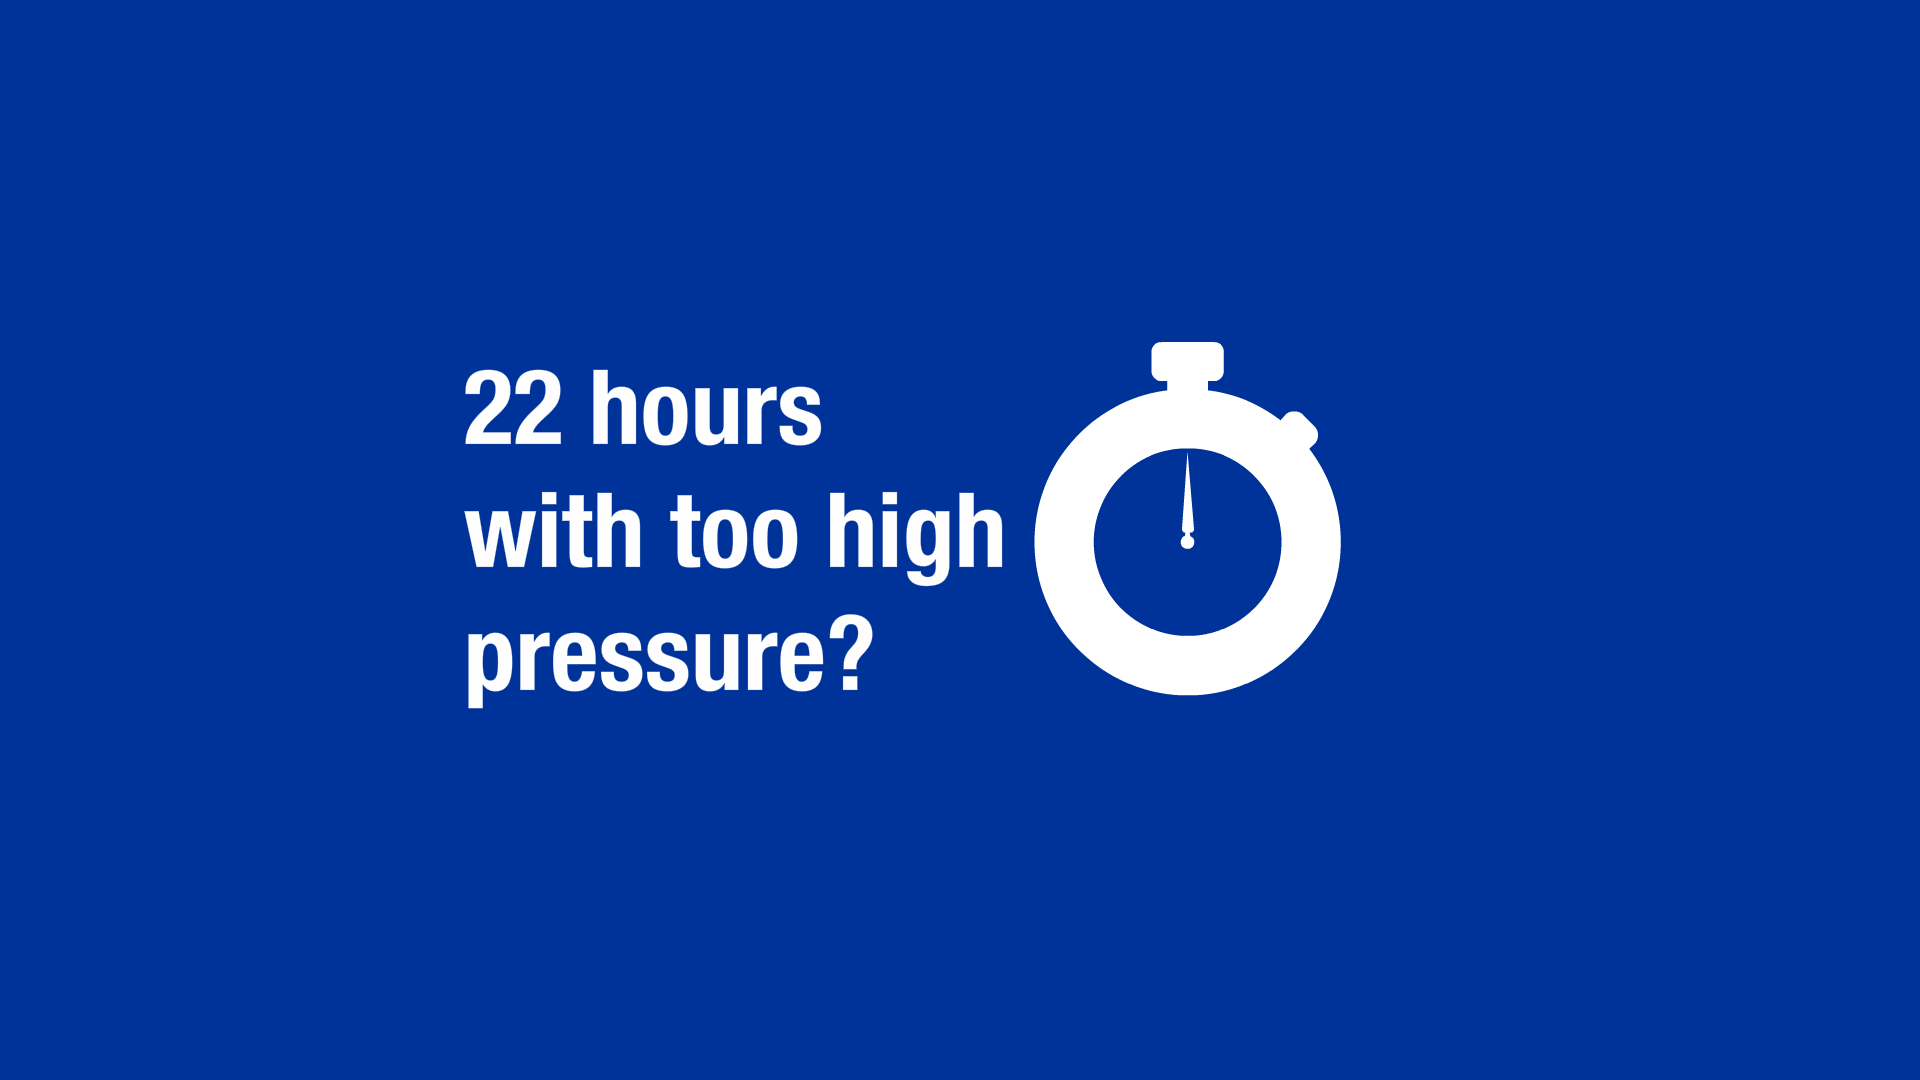 Too high pressure up to 22 hours a day is quite common - pressure management can lower the pressure and reduce water loss